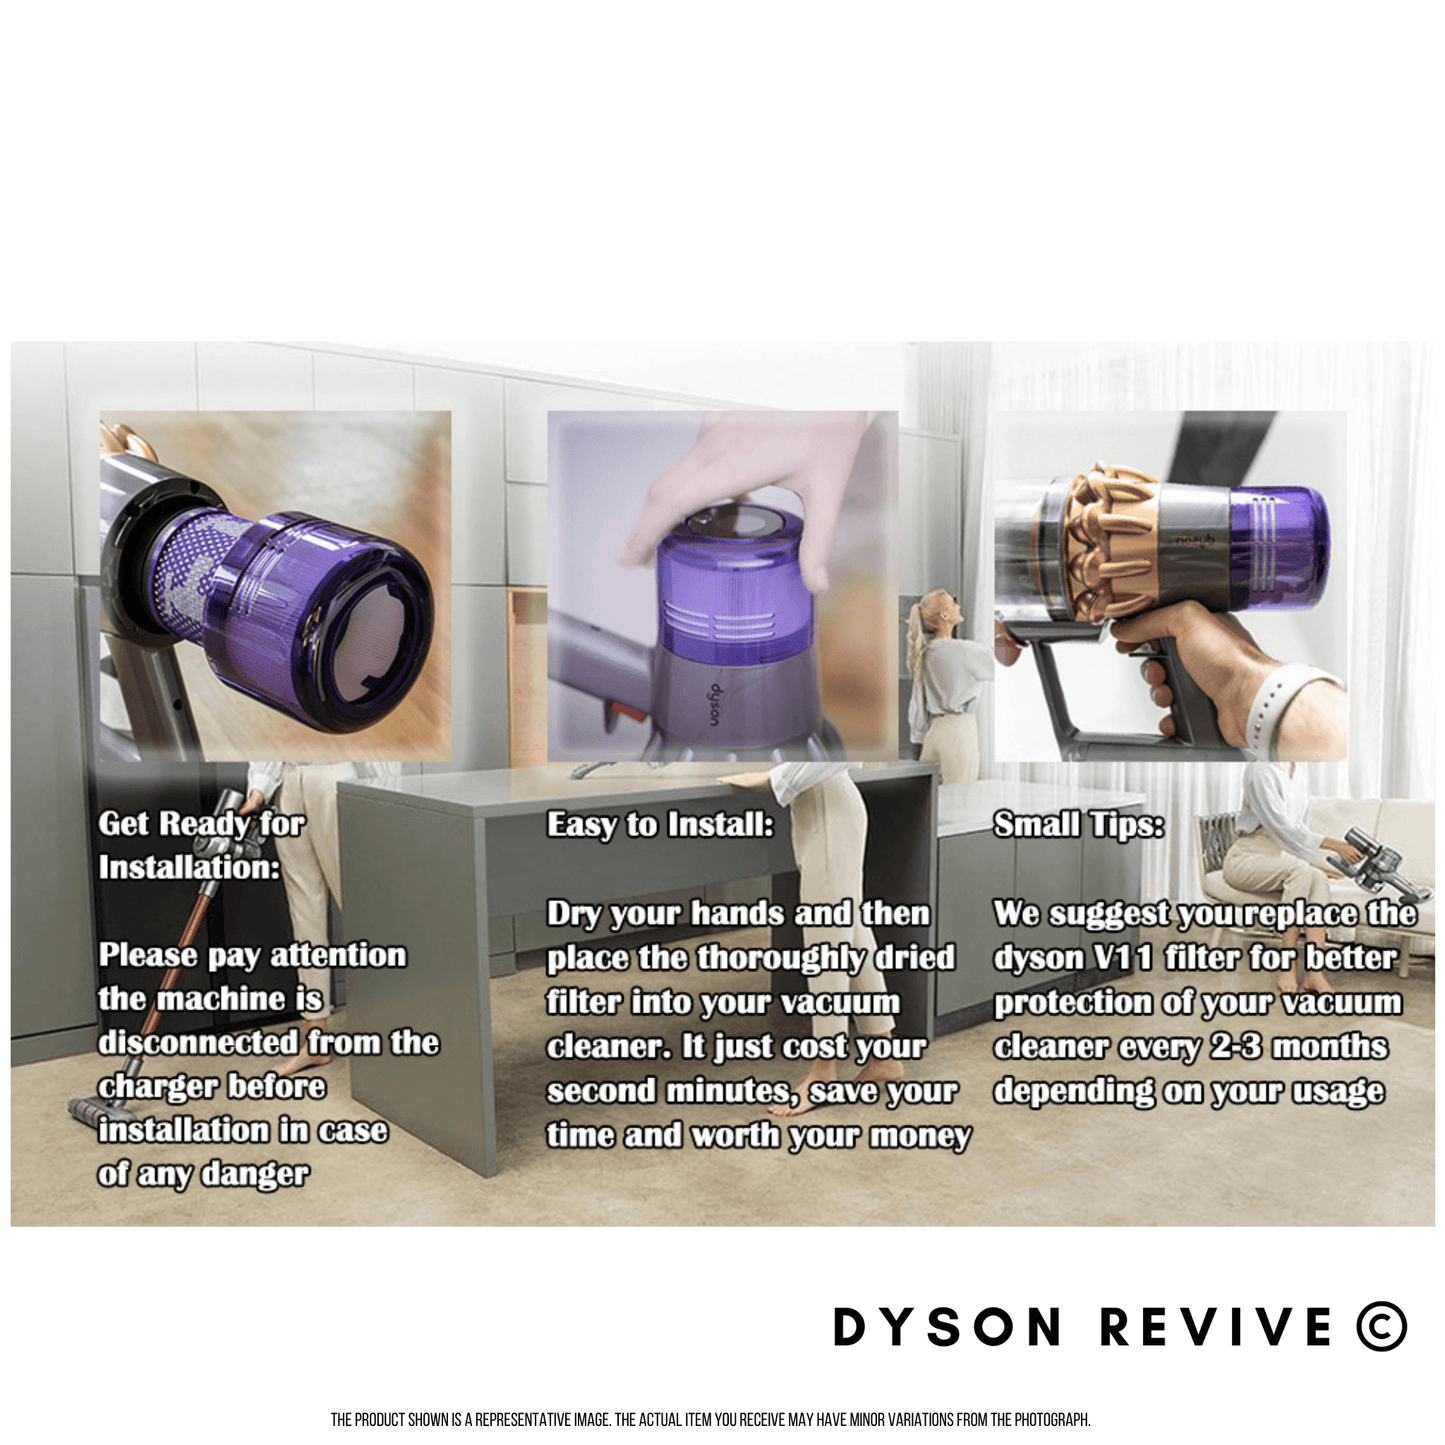 Brand New Compatible Dyson V11, V15 Vacuum Filter for V11 series Cyclone Torque Drive Animal - Dyson Revive